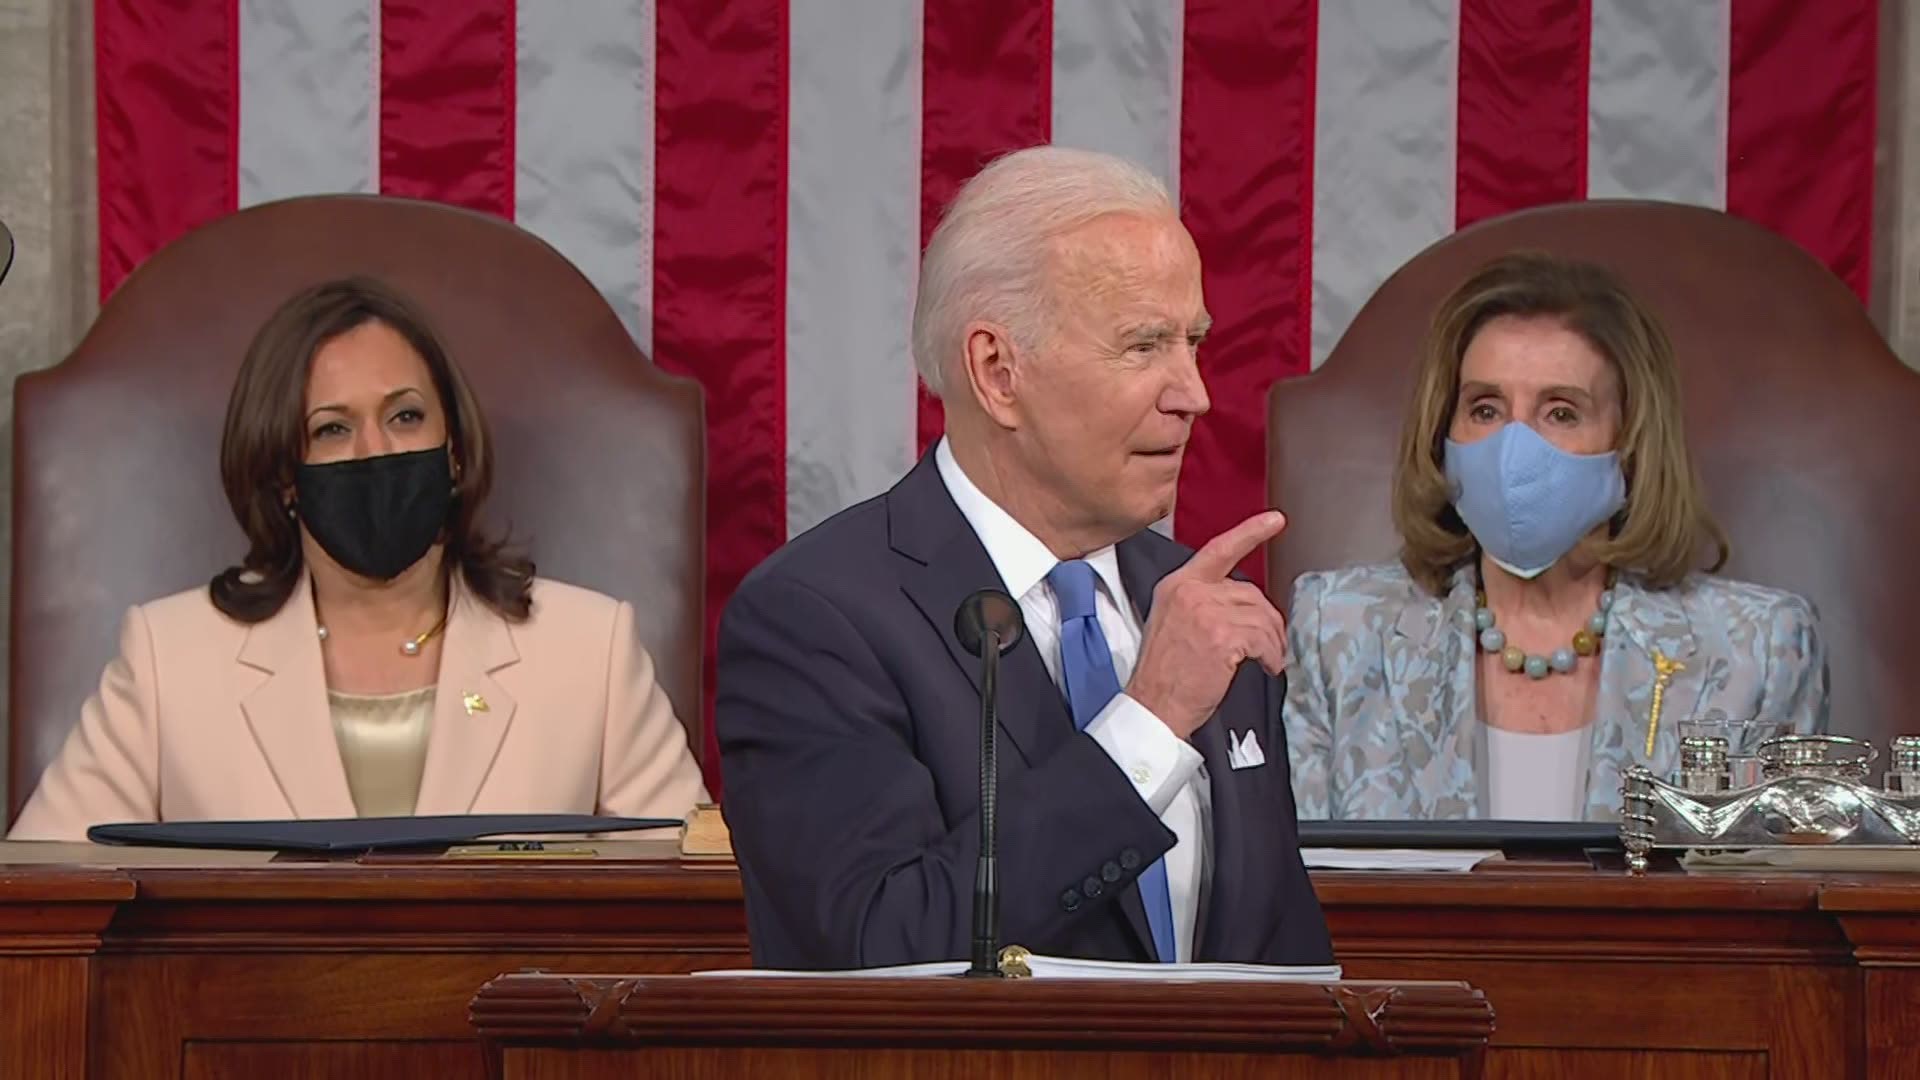 Biden discussed his administration's accomplishments during a joint address to Congress.